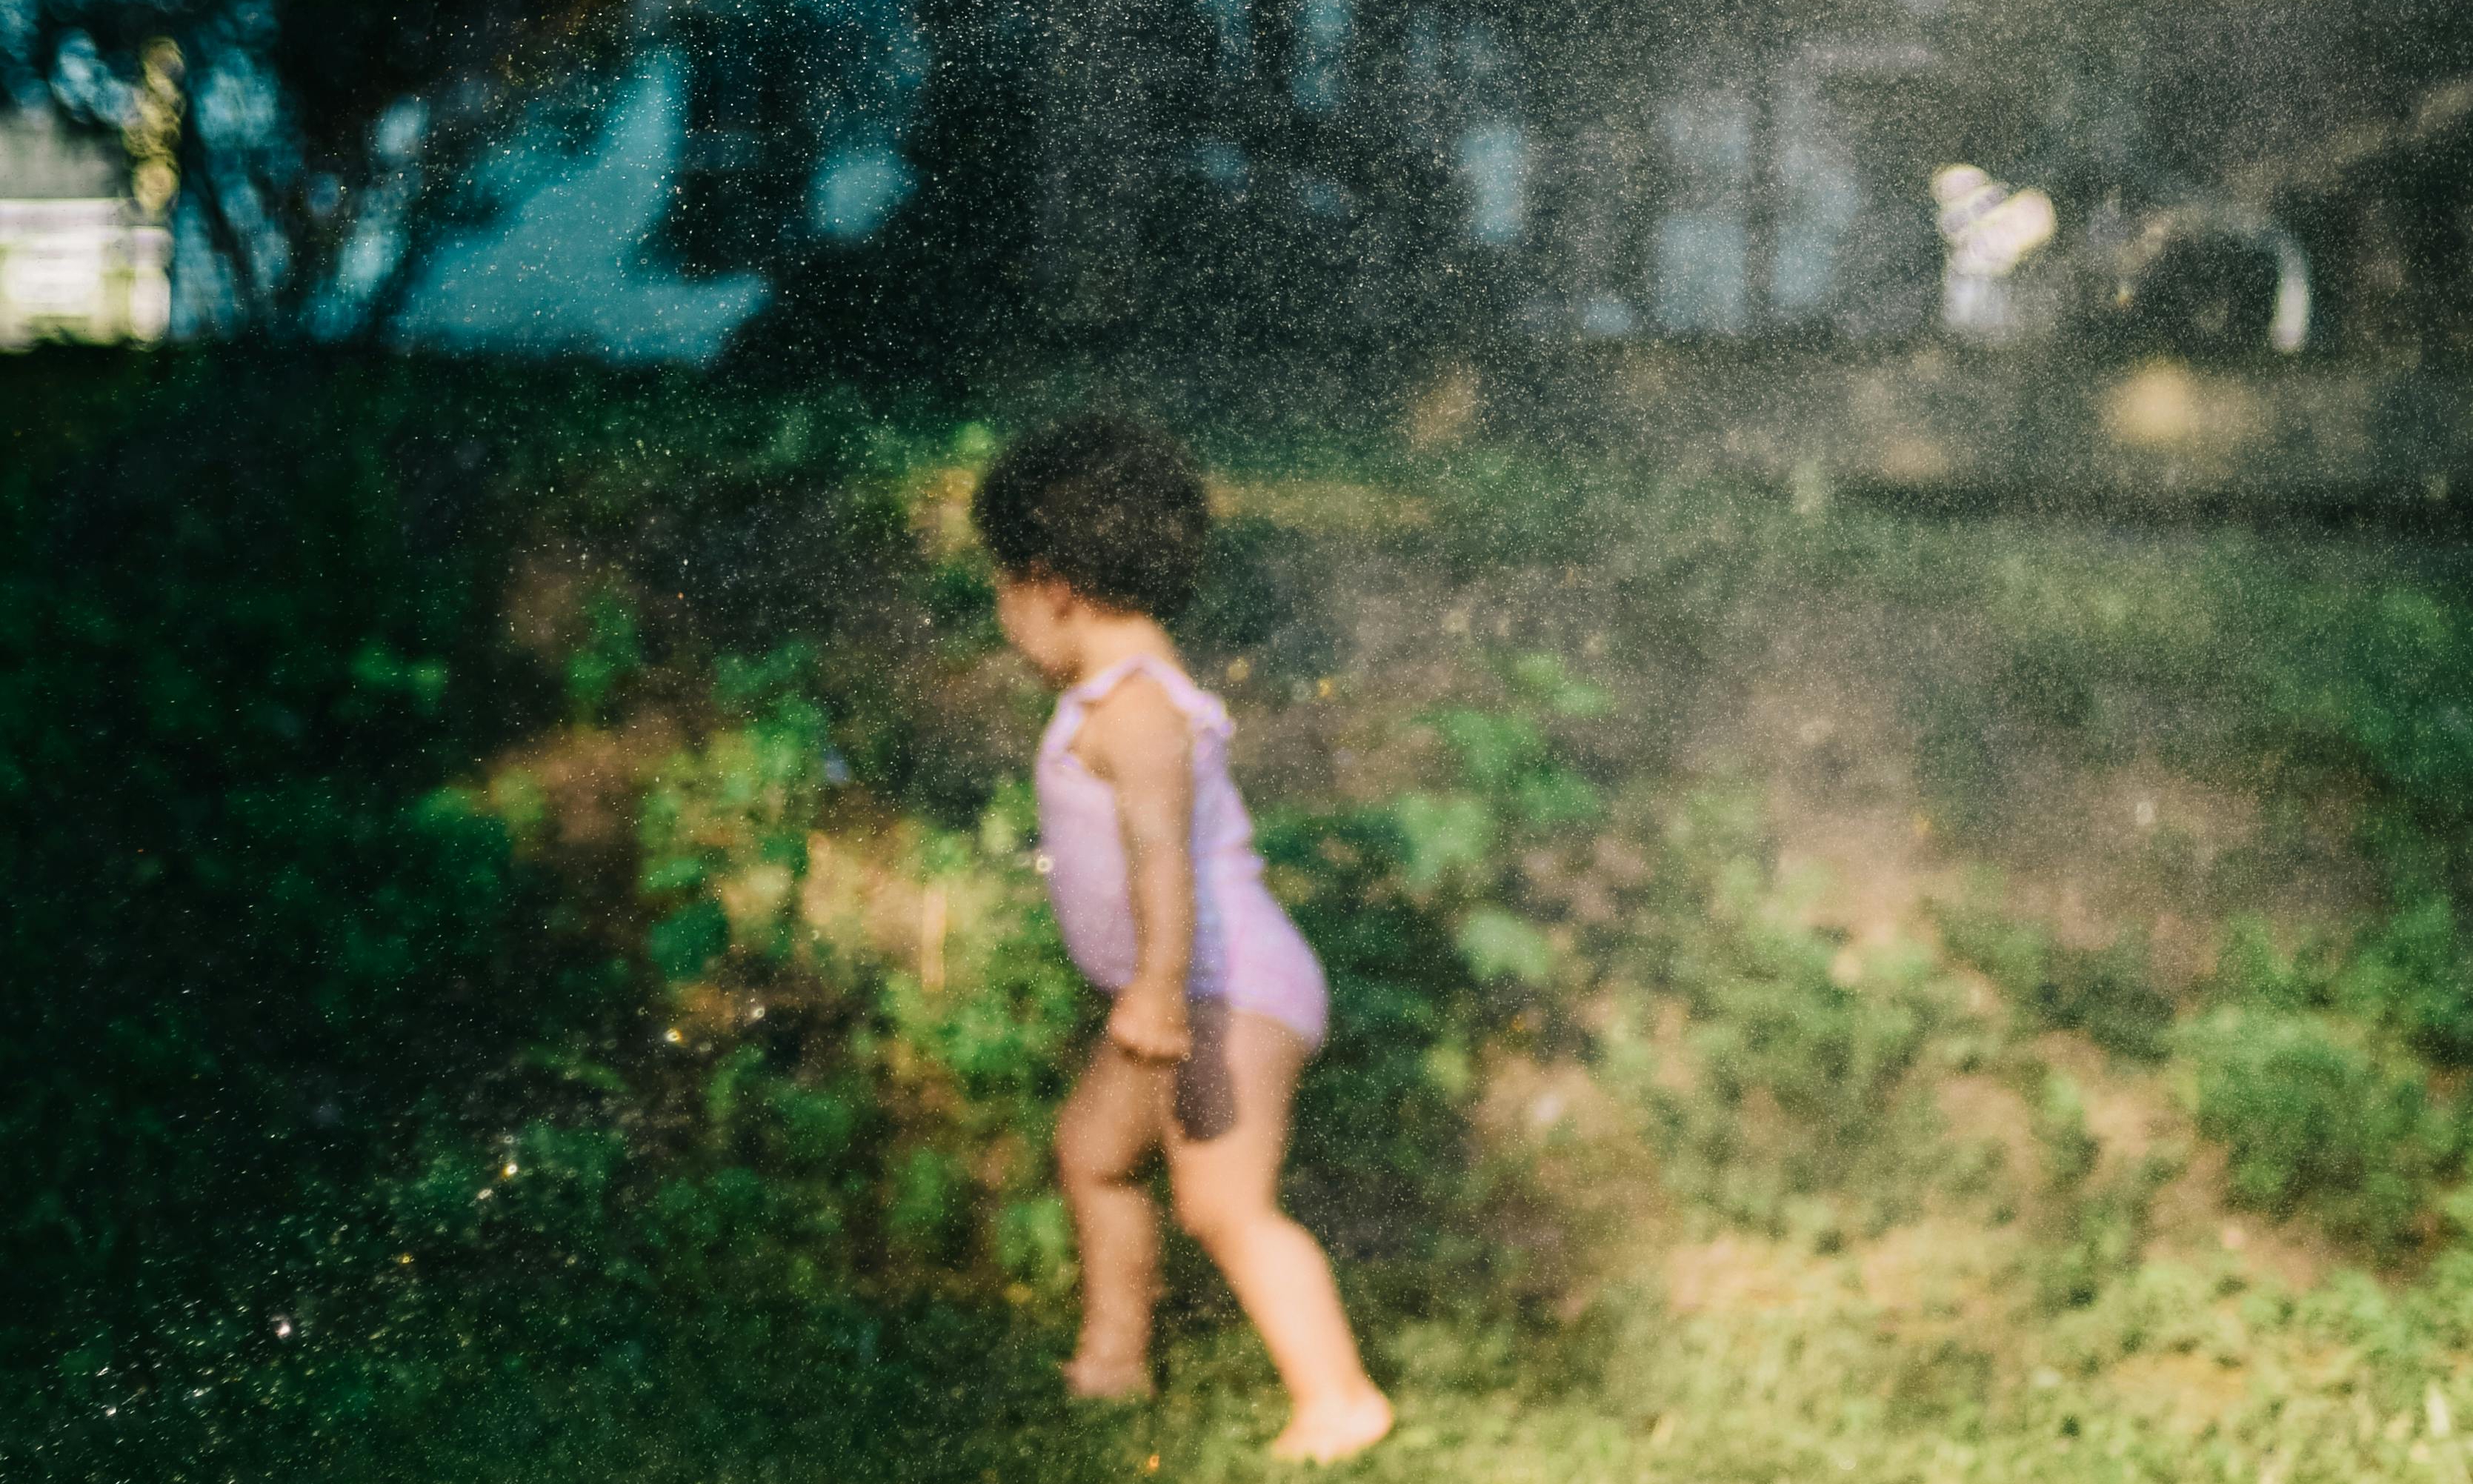 Photo of Helen as a young girl, playing in a backyard | Source: Pexels